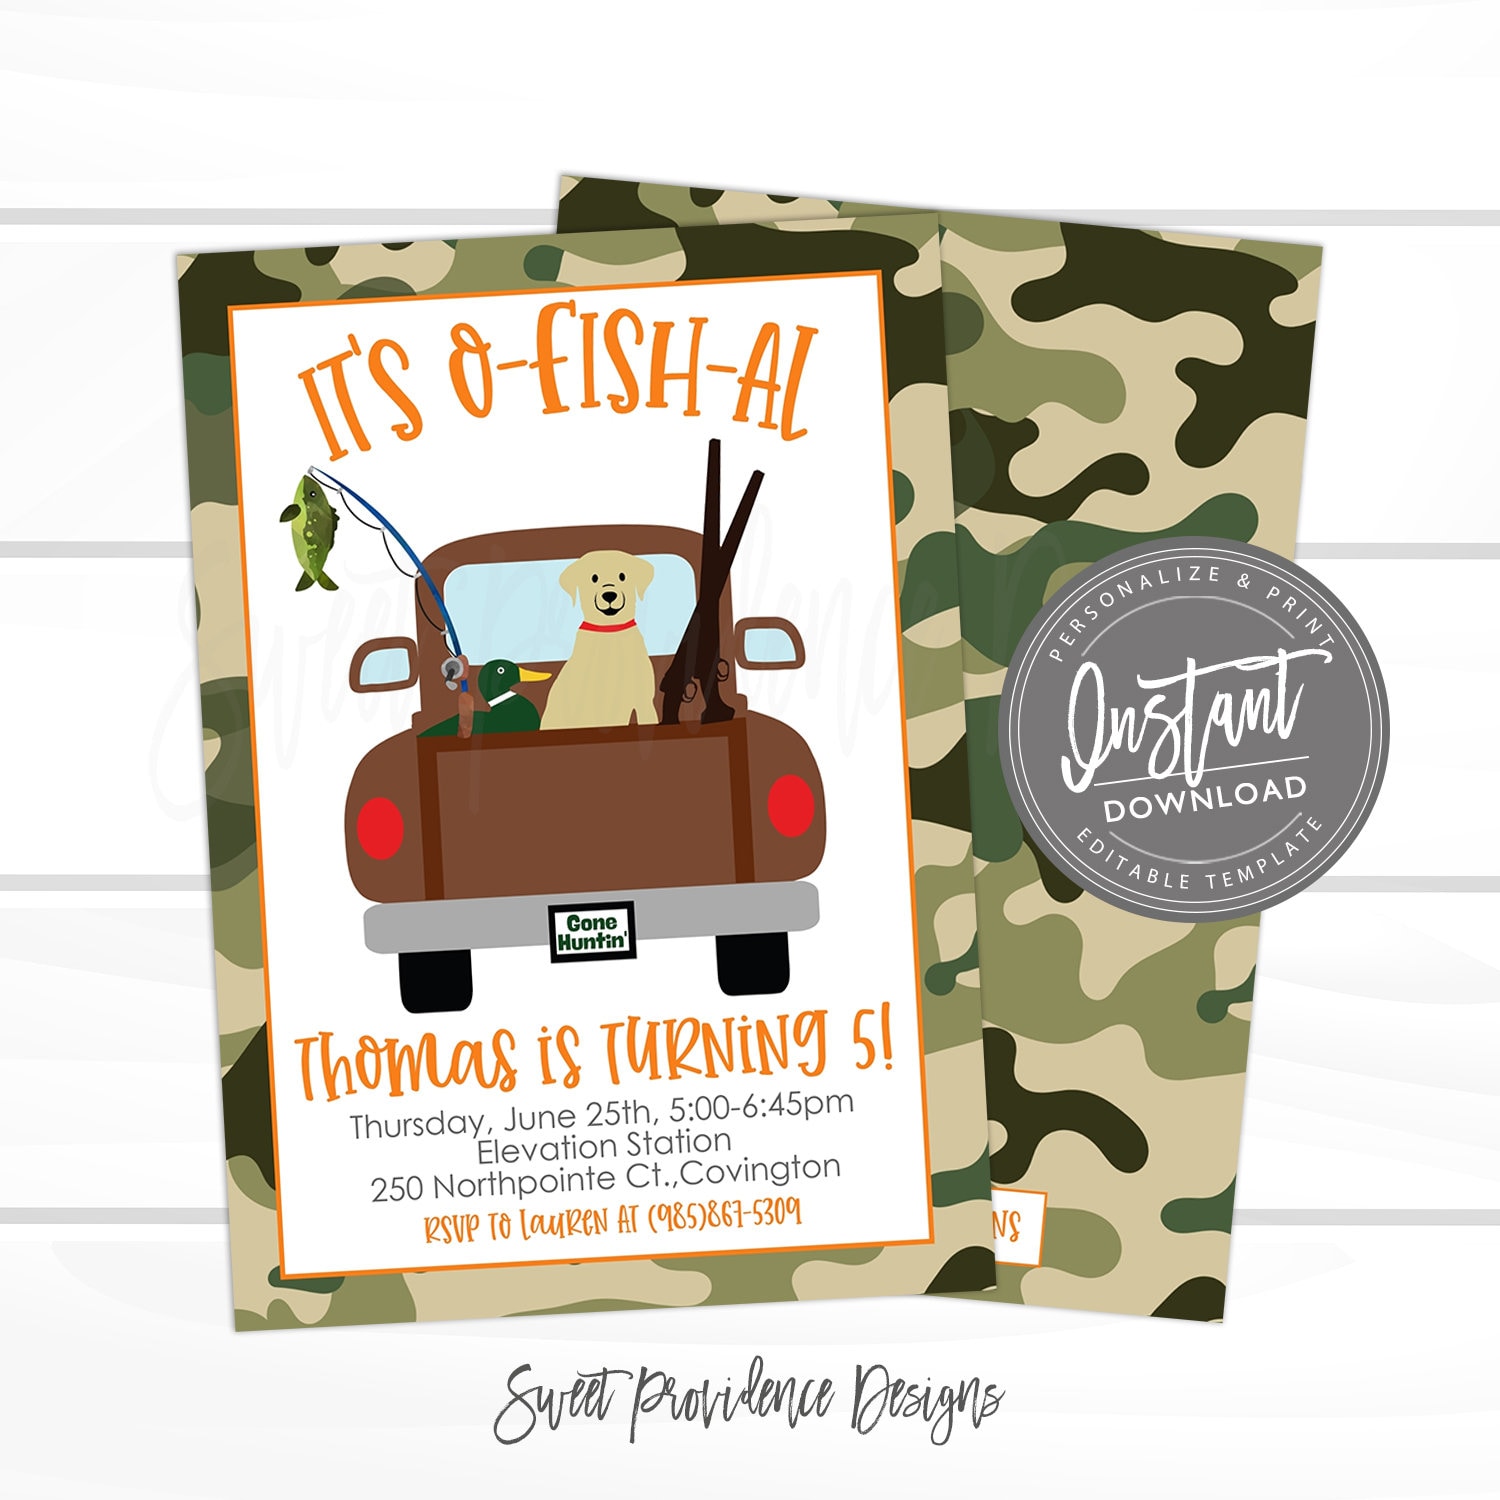 Hunting and Fishing Birthday Invitation, Boy Fishing Invitation, O-Fish-al,  Editable Birthday invite, Outdoors Invitation, Instant Access